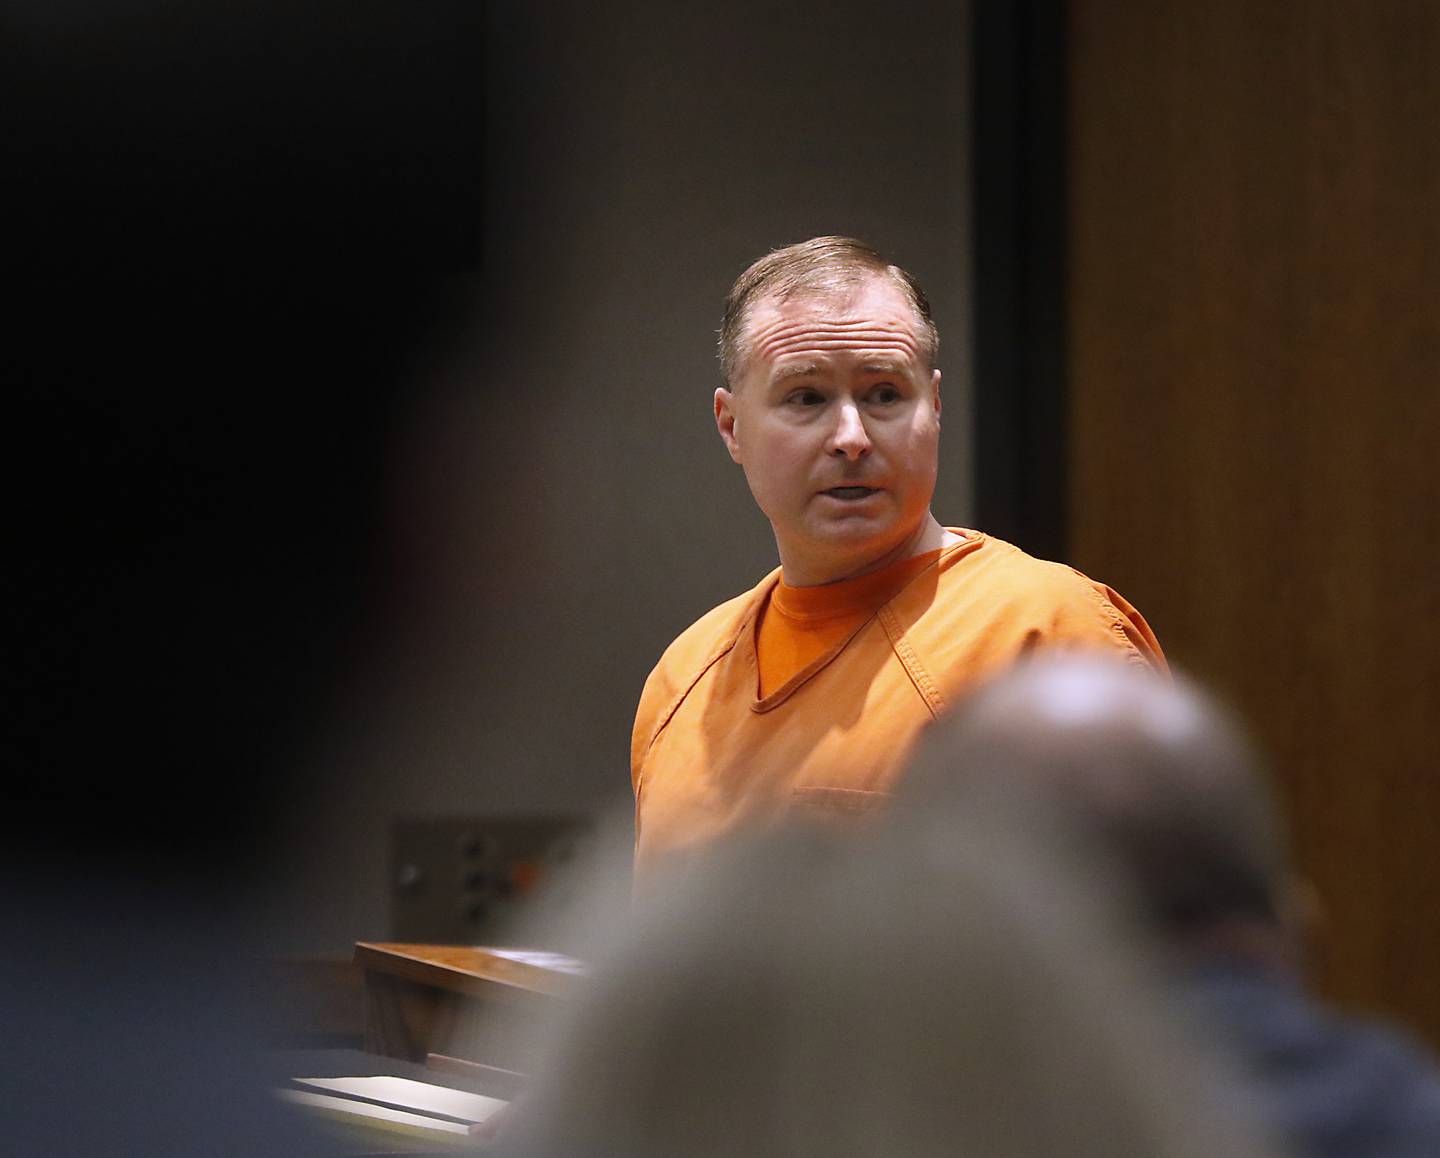 William Bishop looks back at the people in the gallery as he speaks during his sentencing hearing before McHenry County Judge Michael Coppedge on Thursday, Jan. 26, 2023, in the McHenry County courthouse in Woodstock.